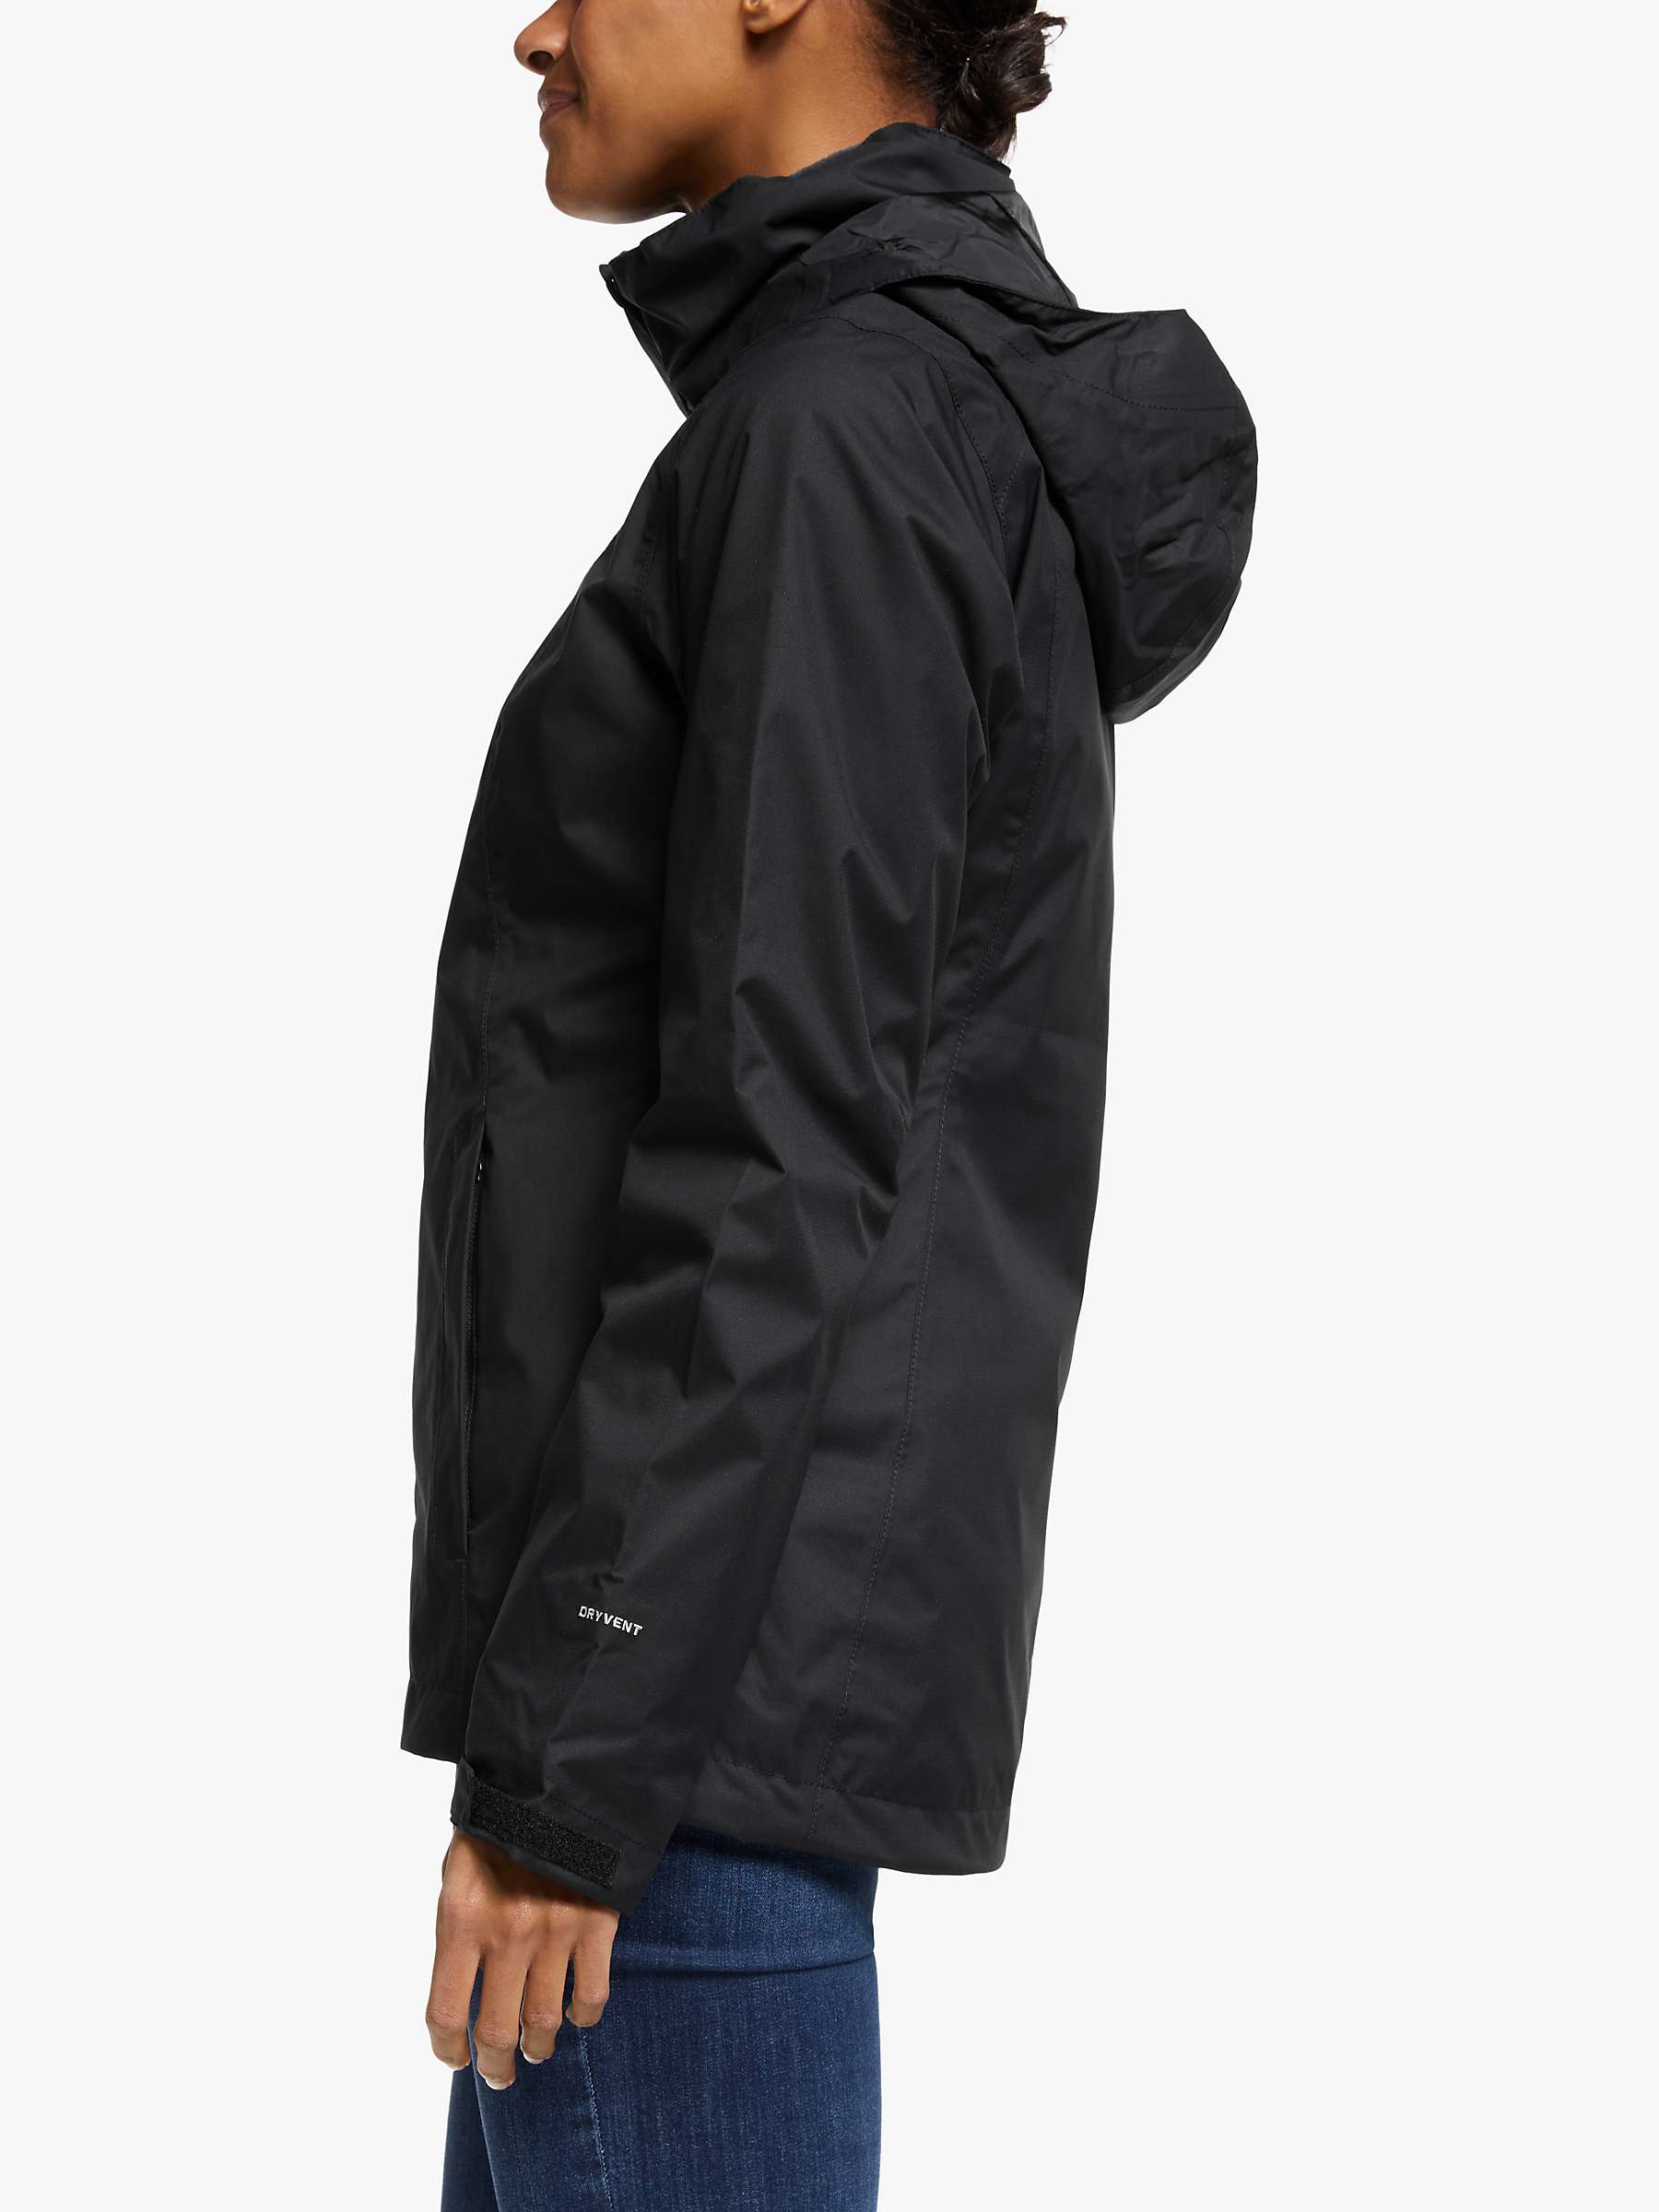 Buy The North Face Evolve II Triclimate 3-in-1 Waterproof Women's Jacket Online at johnlewis.com